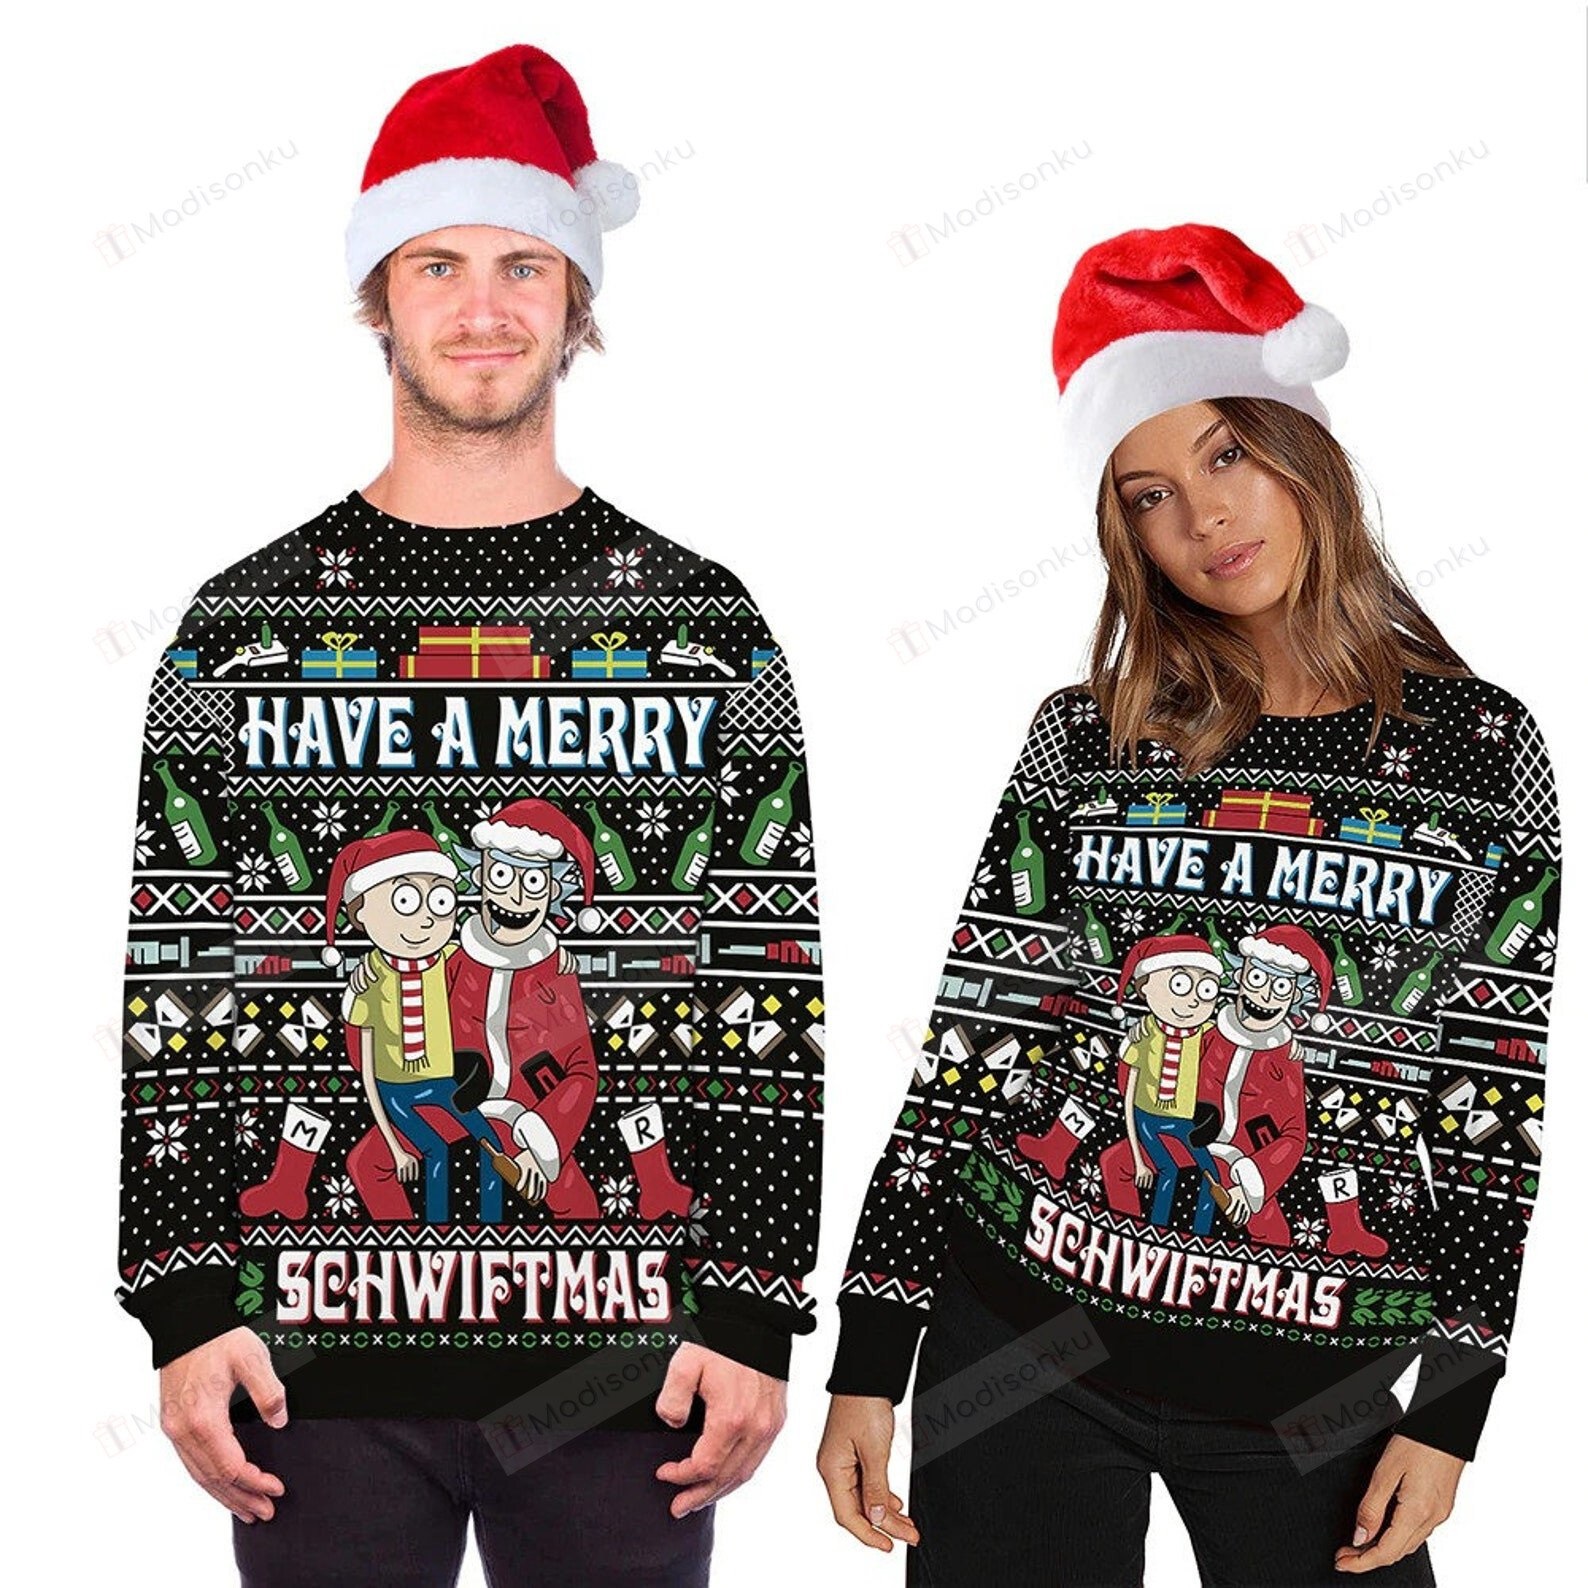 Rick and Morty Have a merry schwiftmas ugly christmas sweater